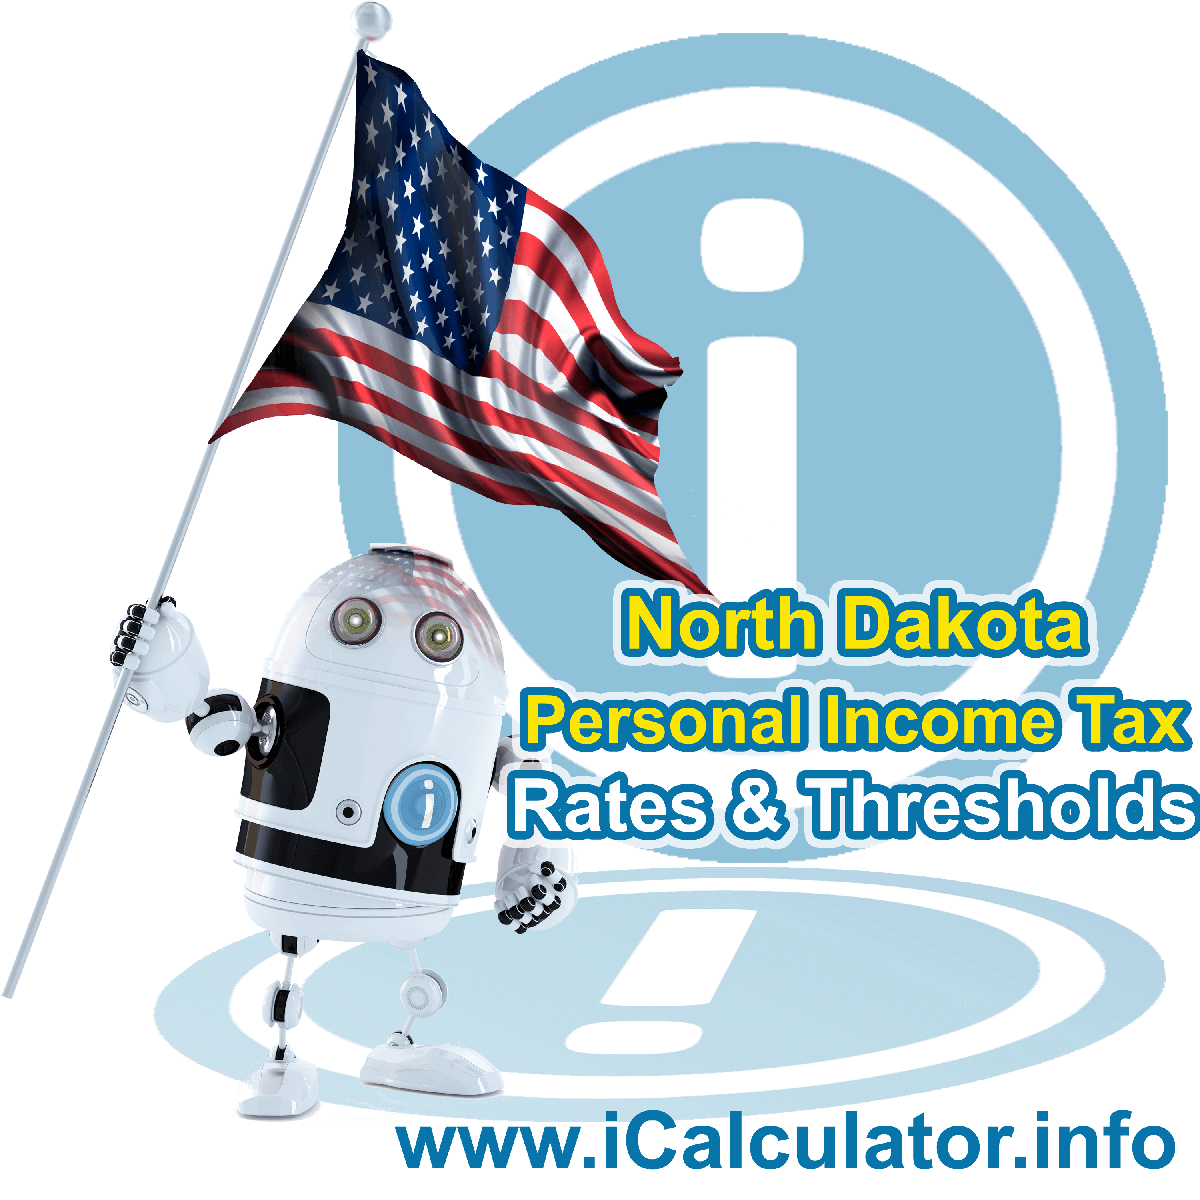 North Dakota State Tax Tables 2021. This image displays details of the North Dakota State Tax Tables for the 2021 tax return year which is provided in support of the 2021 US Tax Calculator